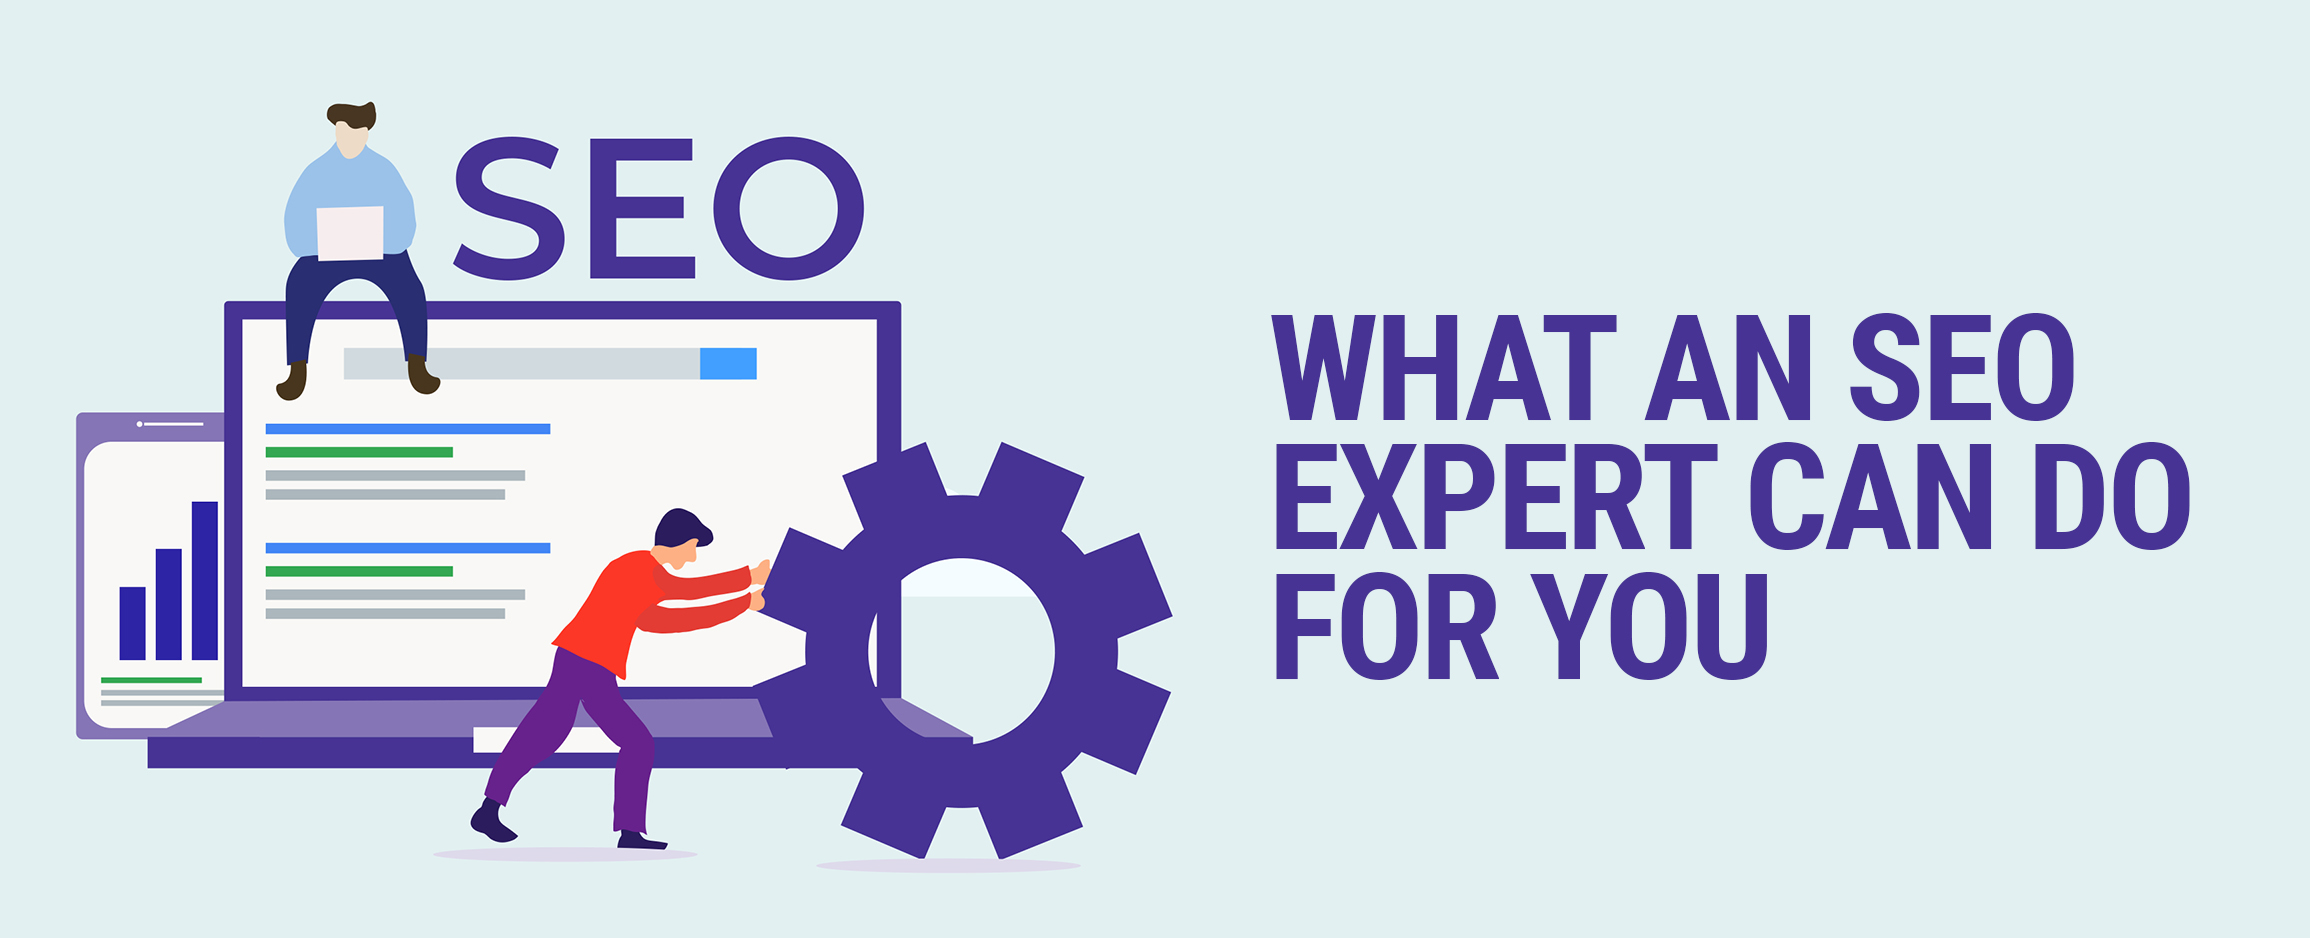 Why is hiring a BigCommerce SEO expert important?